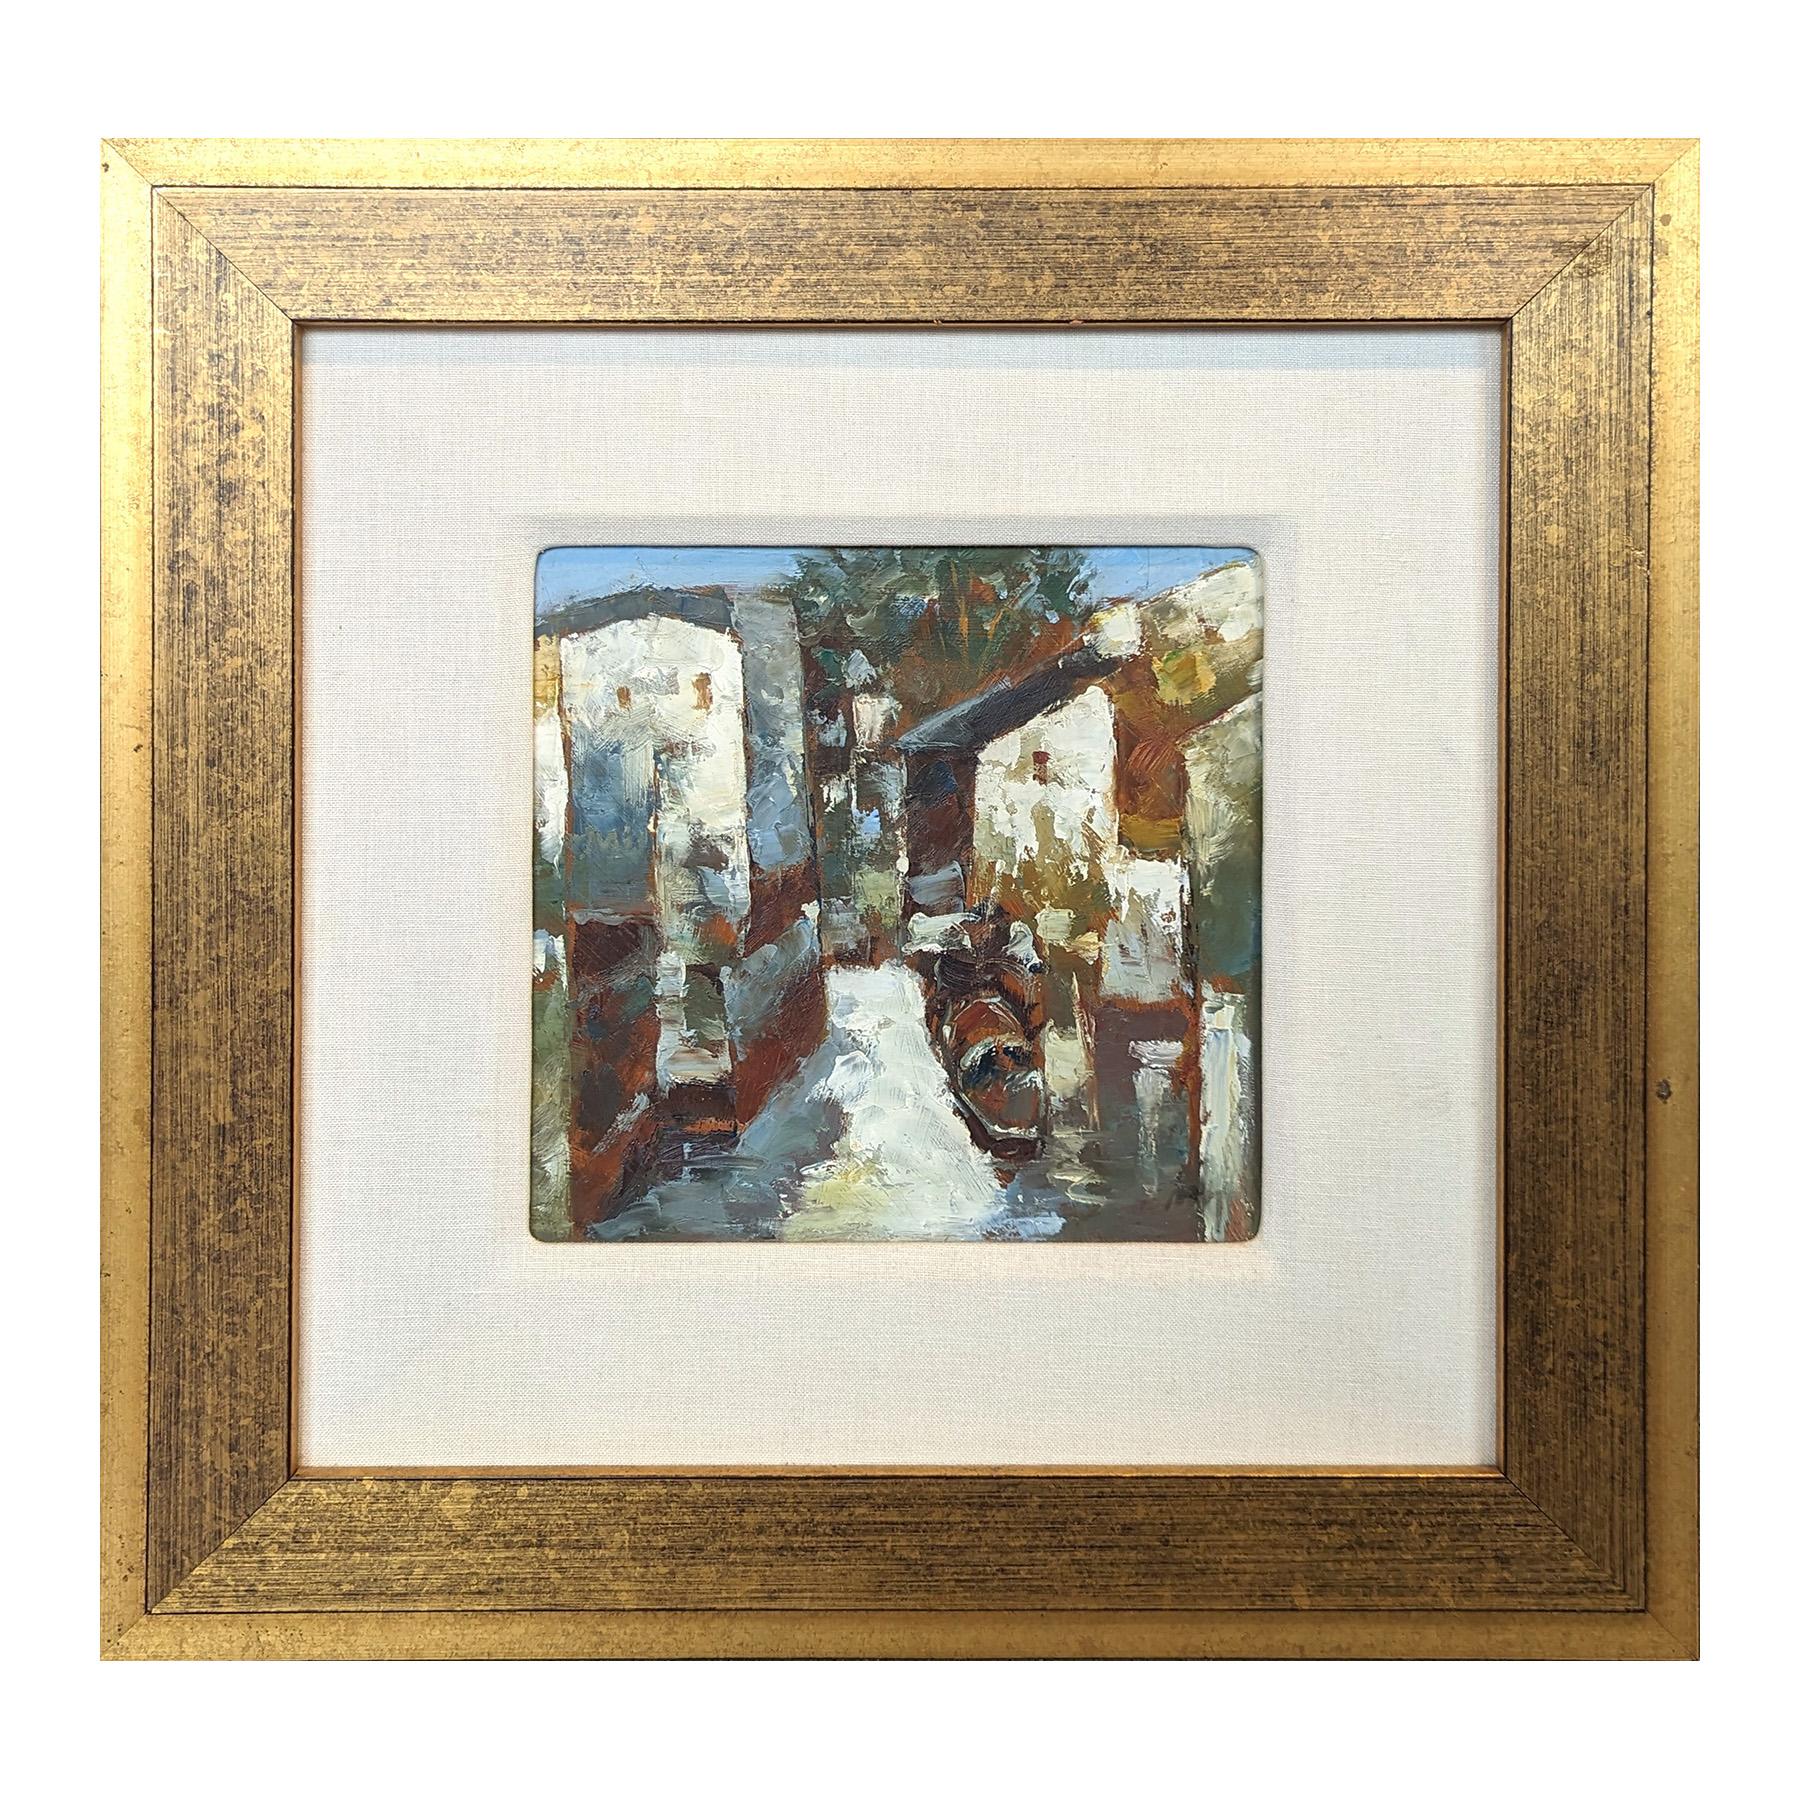 
Modern abstract Cubist inspired city landscape painting. The work features a city rendered in neutral tones with a bright blue sky in the background. Currently hung in a clean, gold frame with an off-white matting. Stamped on the reverse with the